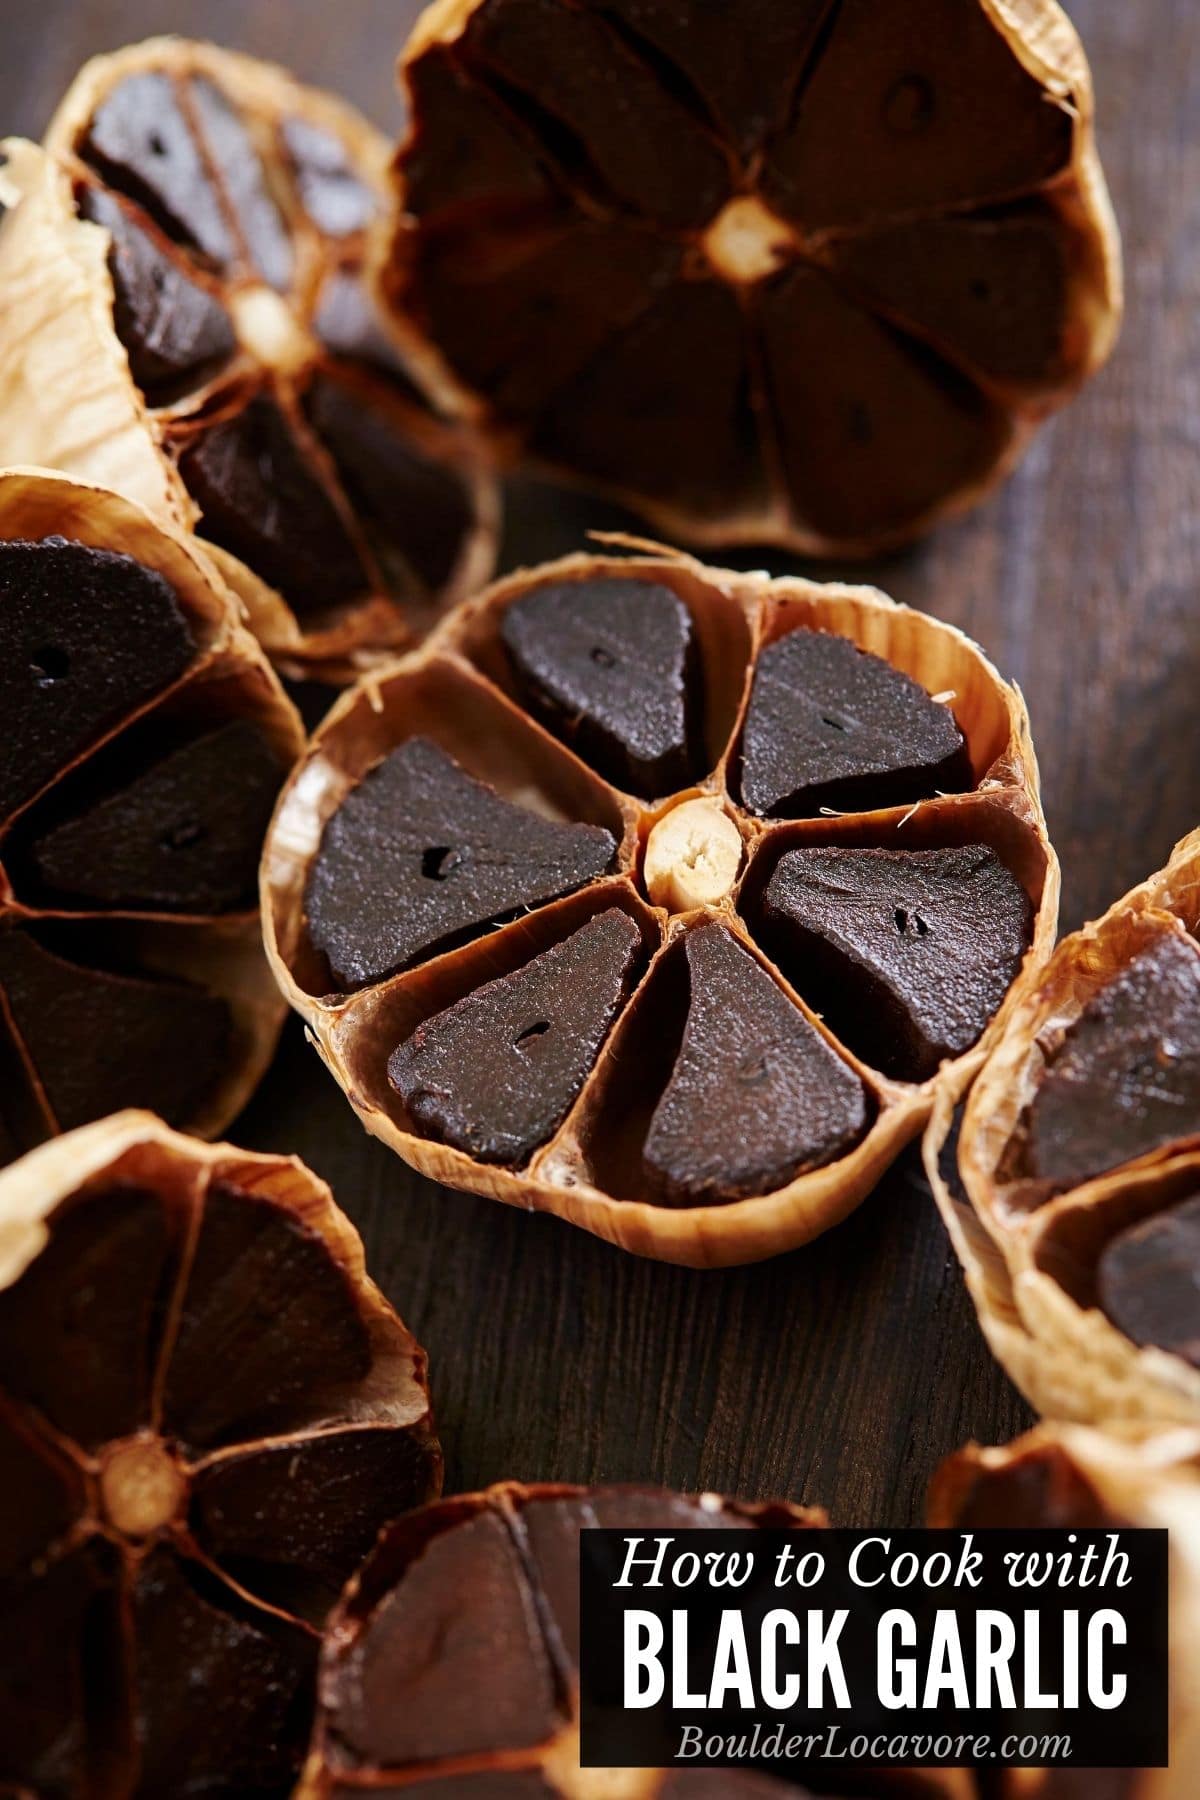 Halved head of black garlic with title